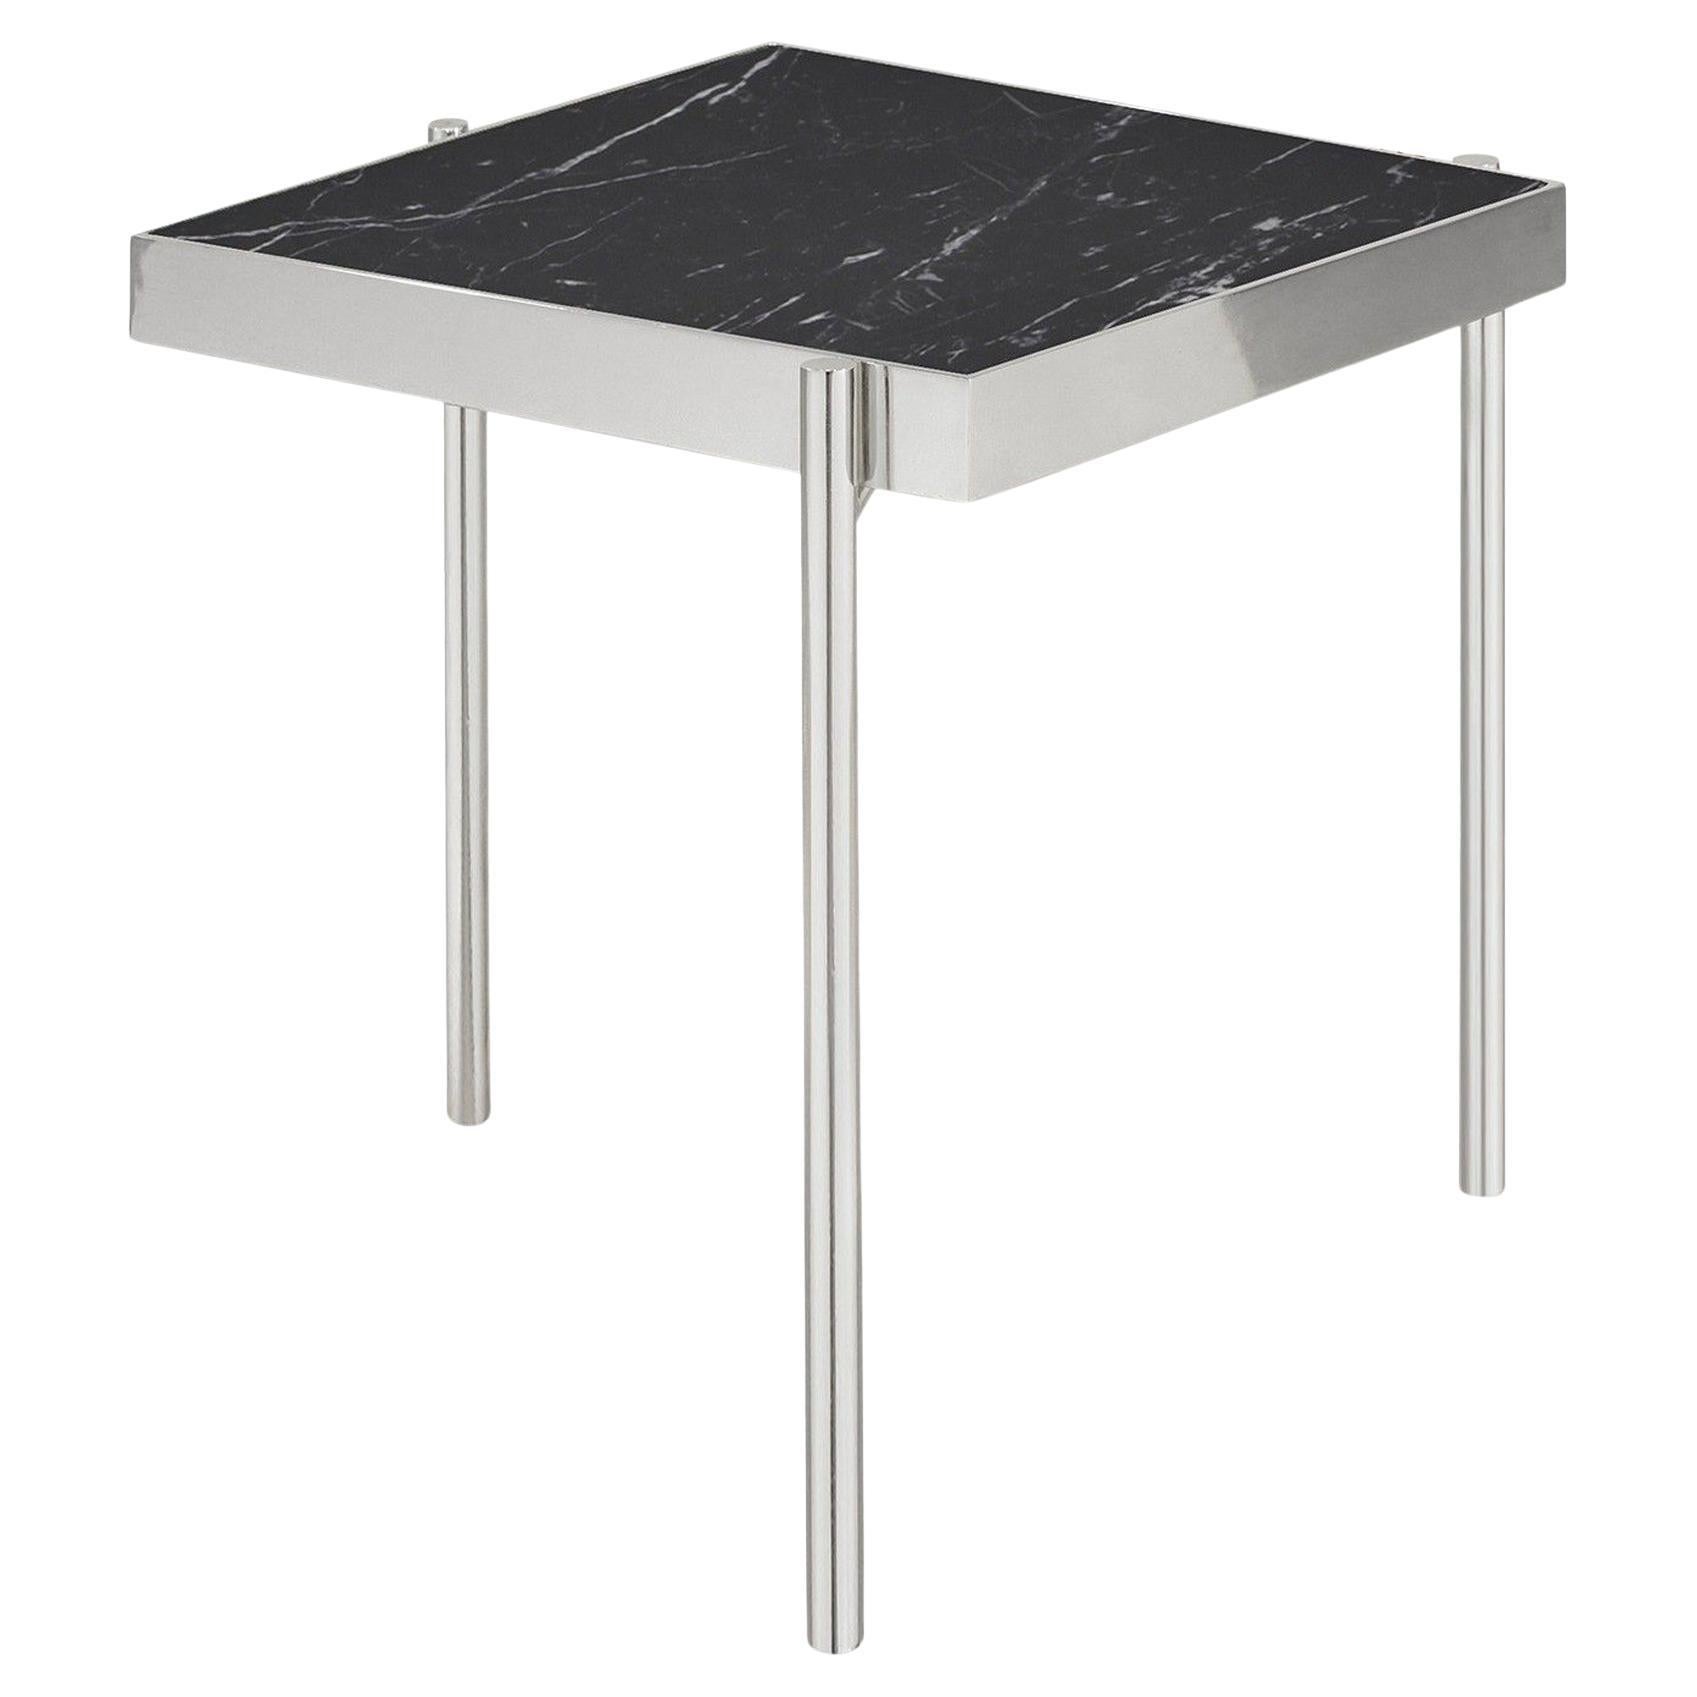 Pair of Black Nero Marquina Marble Stainless Steel Side Tables For Sale